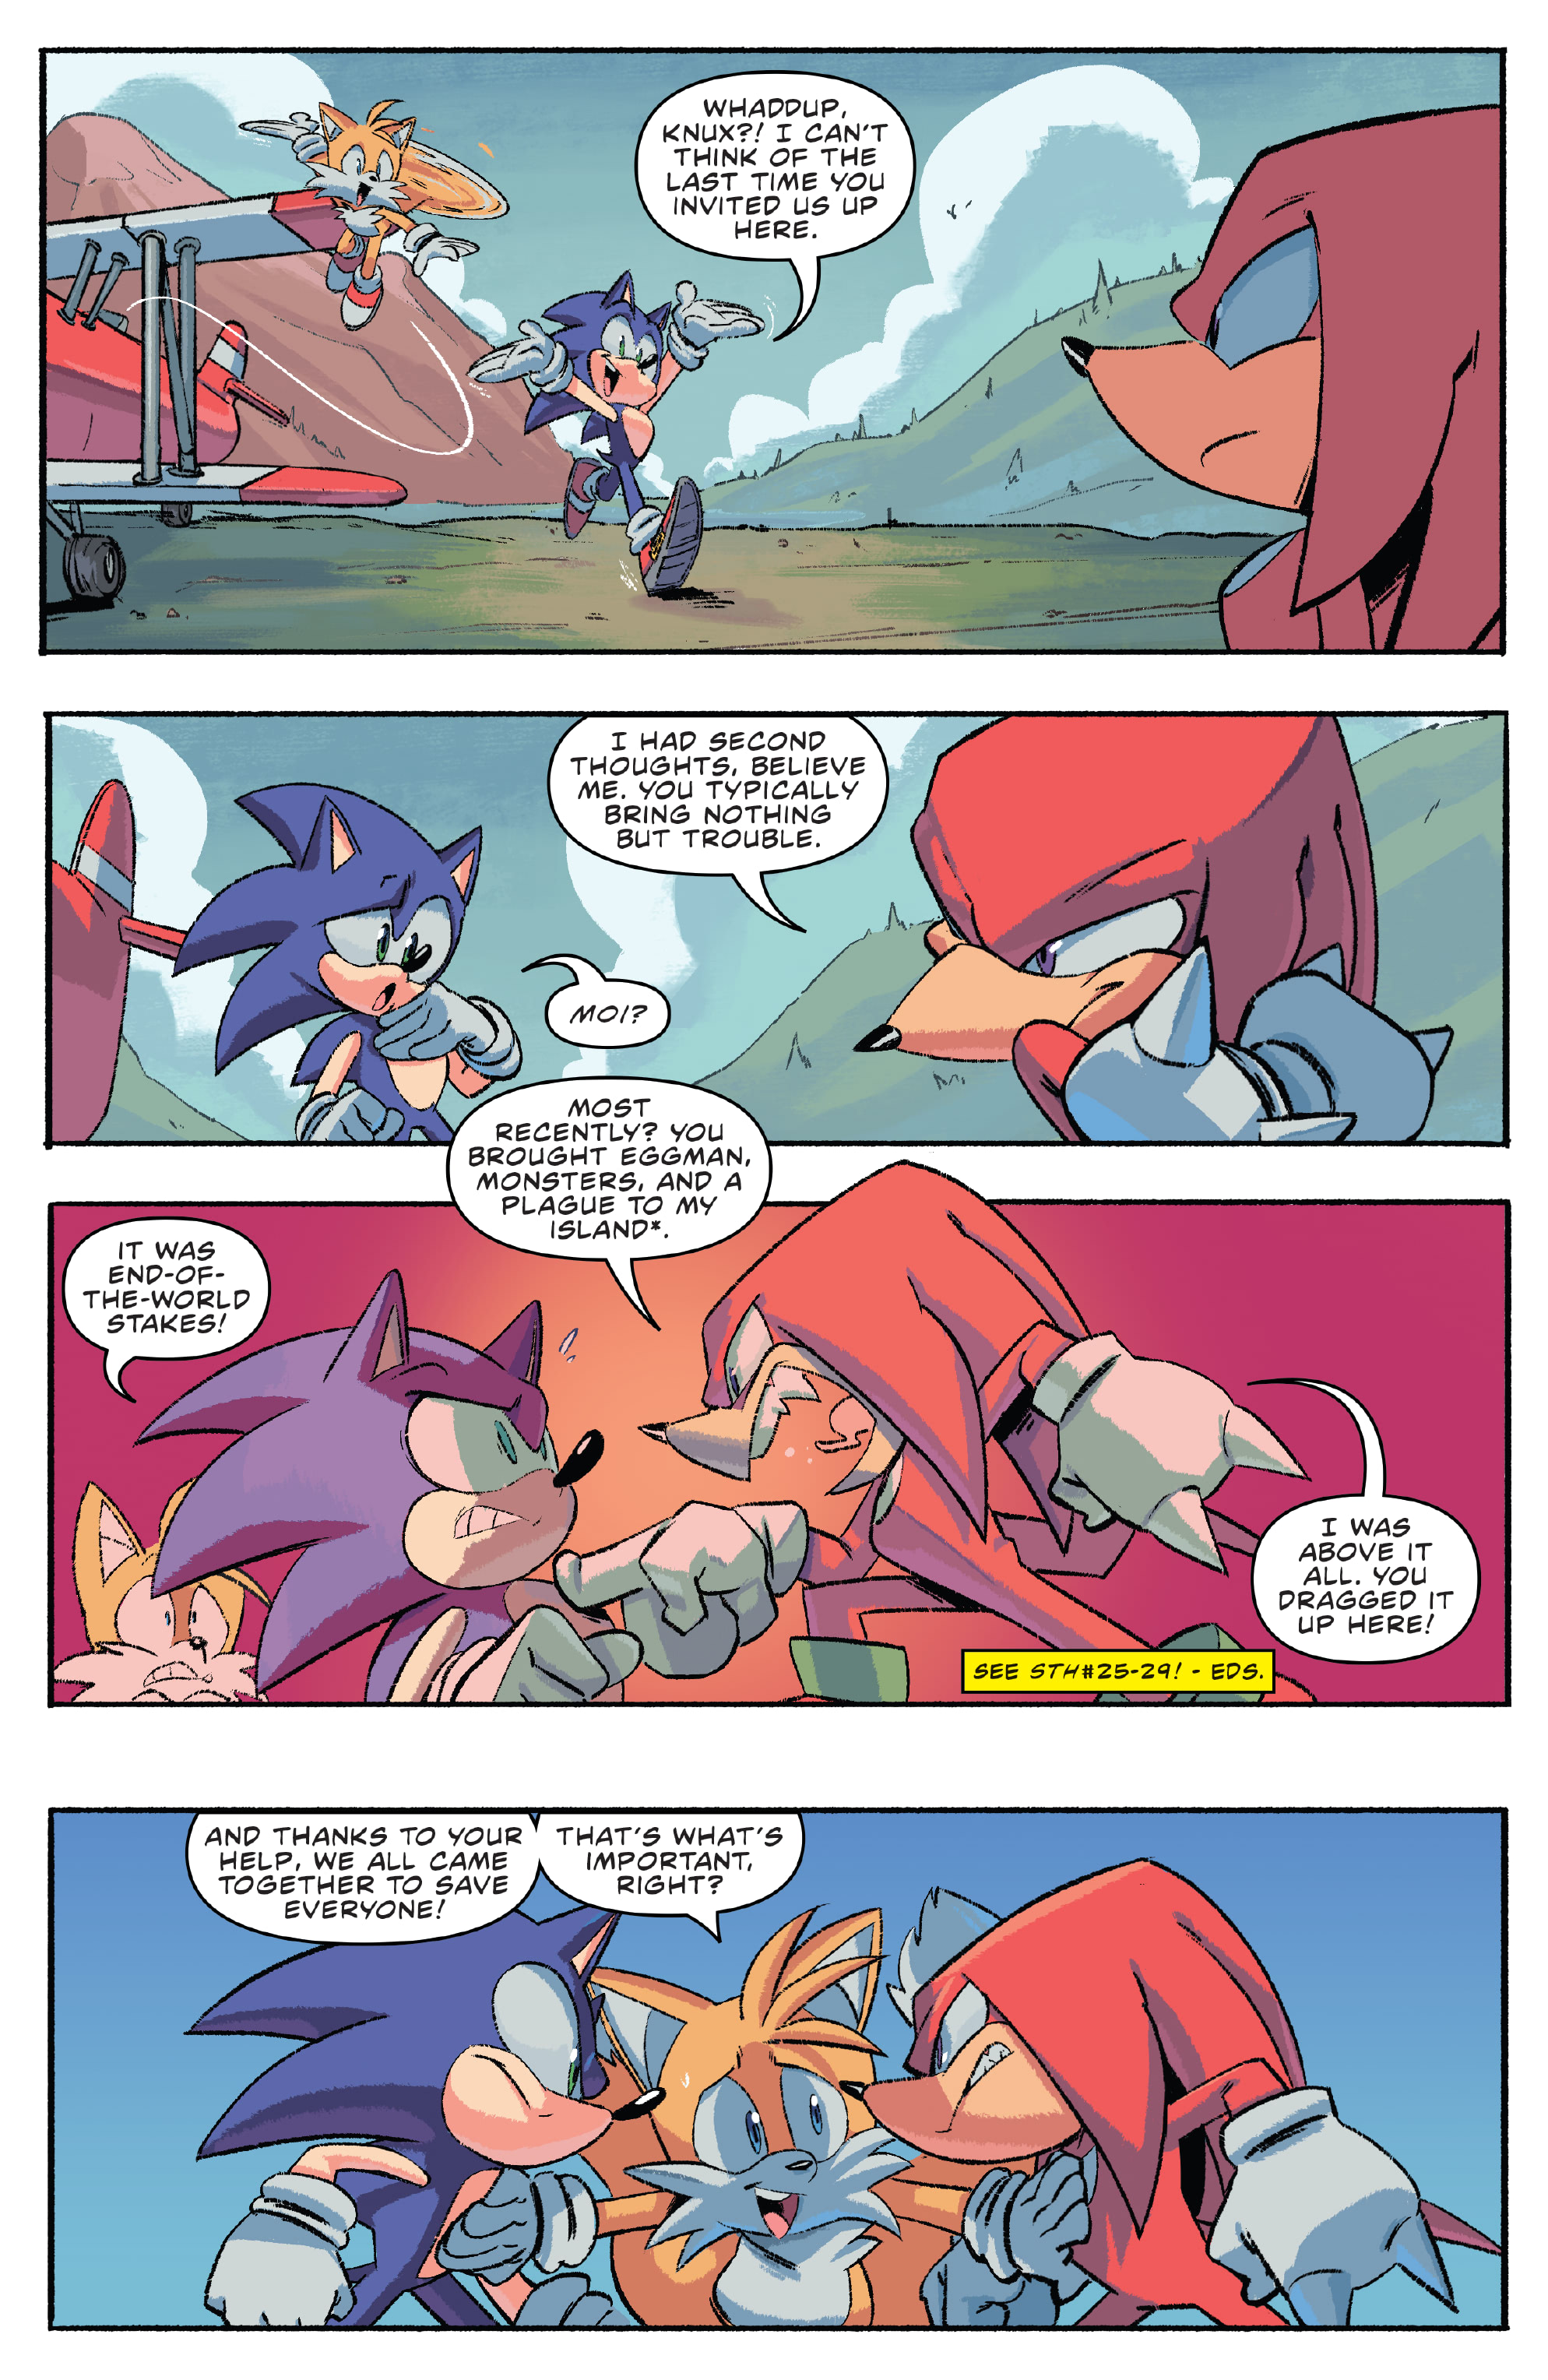 FCBD 2022 Collection: Chapter Sonic the Hedgehog - Page 4